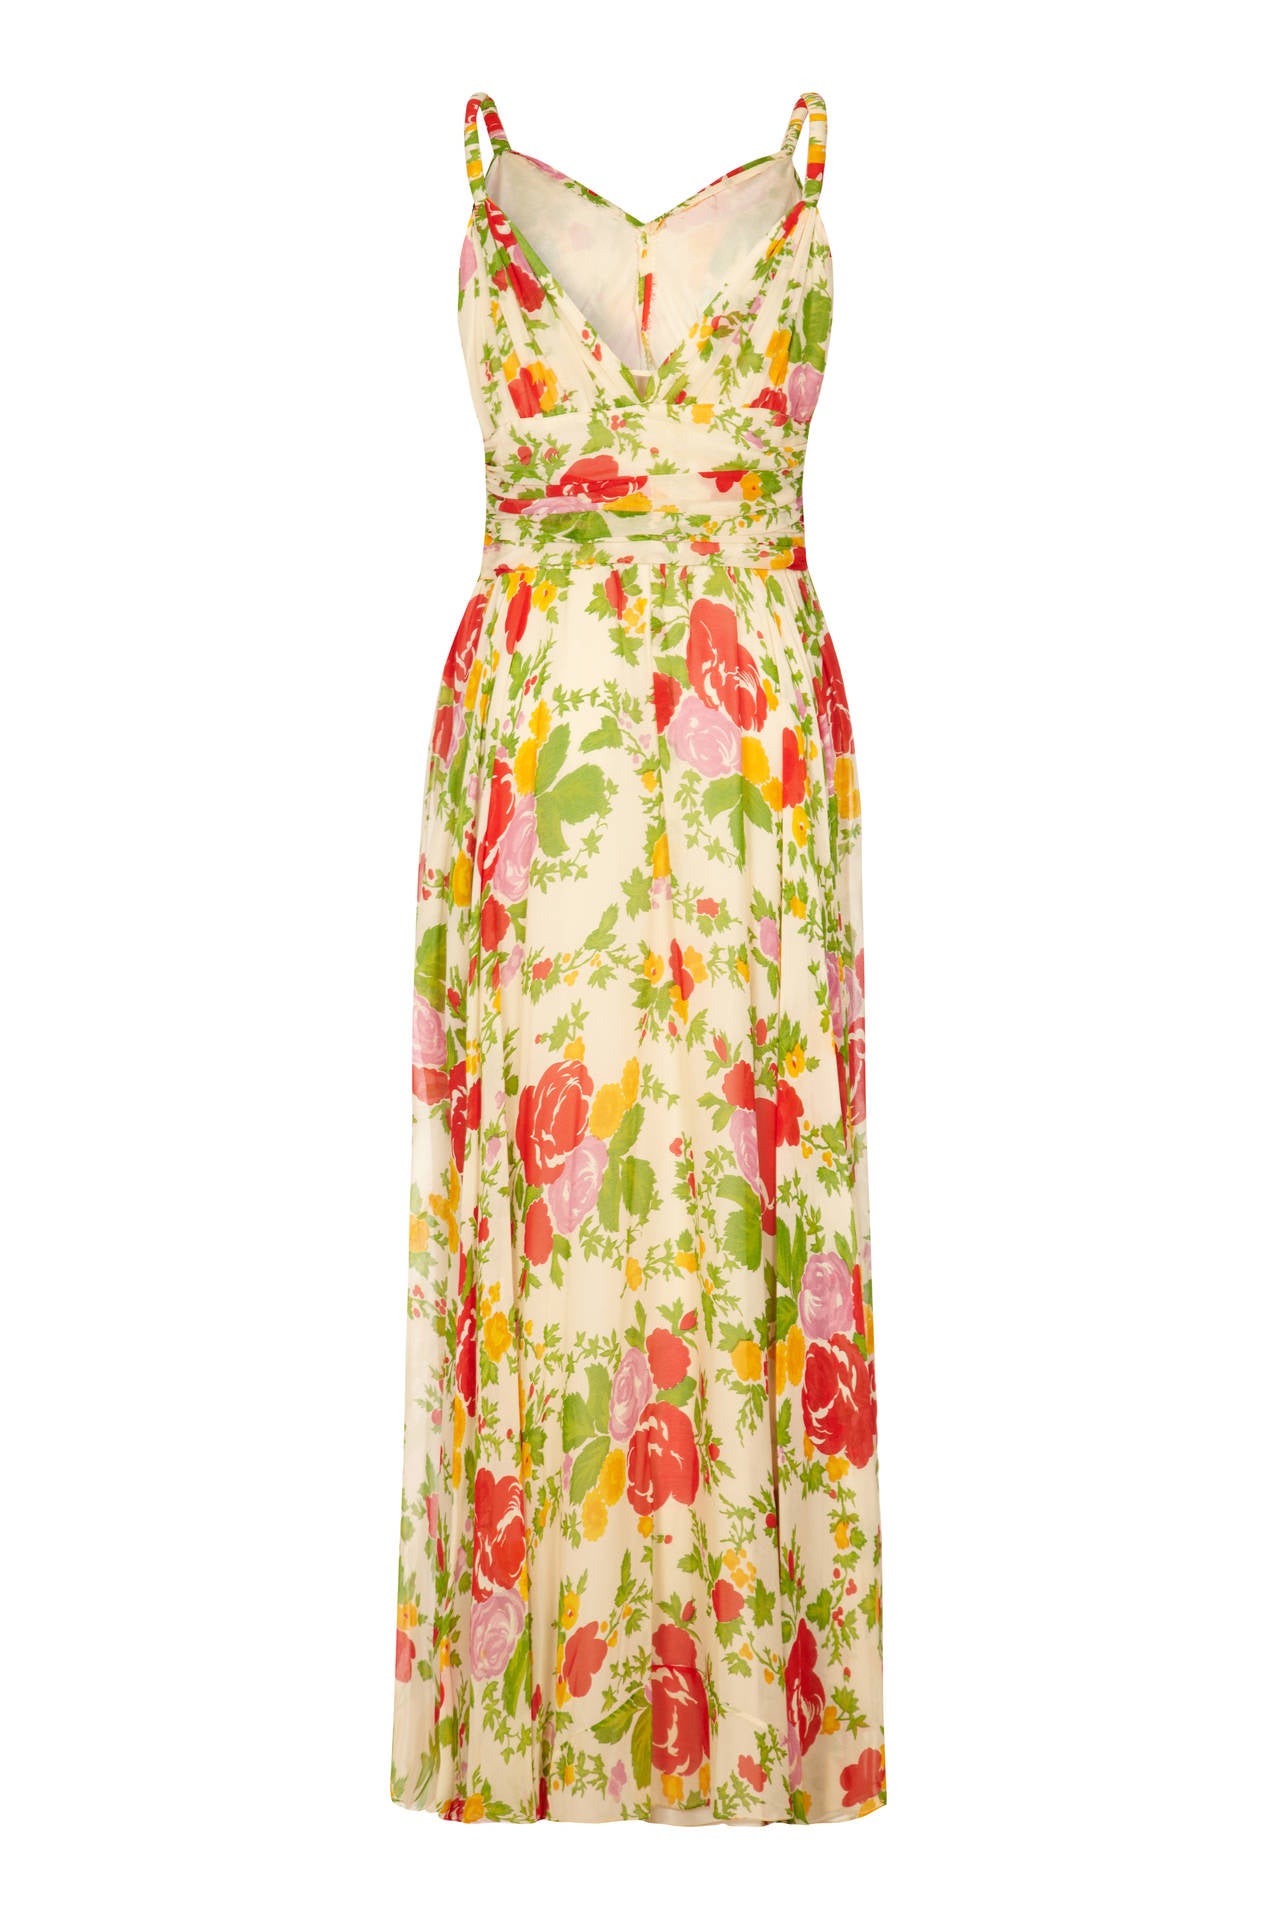 Stunning 1930s full length cream silk chiffon dress with beautiful red, green and yellow floral print.  This piece features a gathered chiffon band to the waist, twisted straps, pretty, low V to the back and is fully lined.  A beautiful dress for